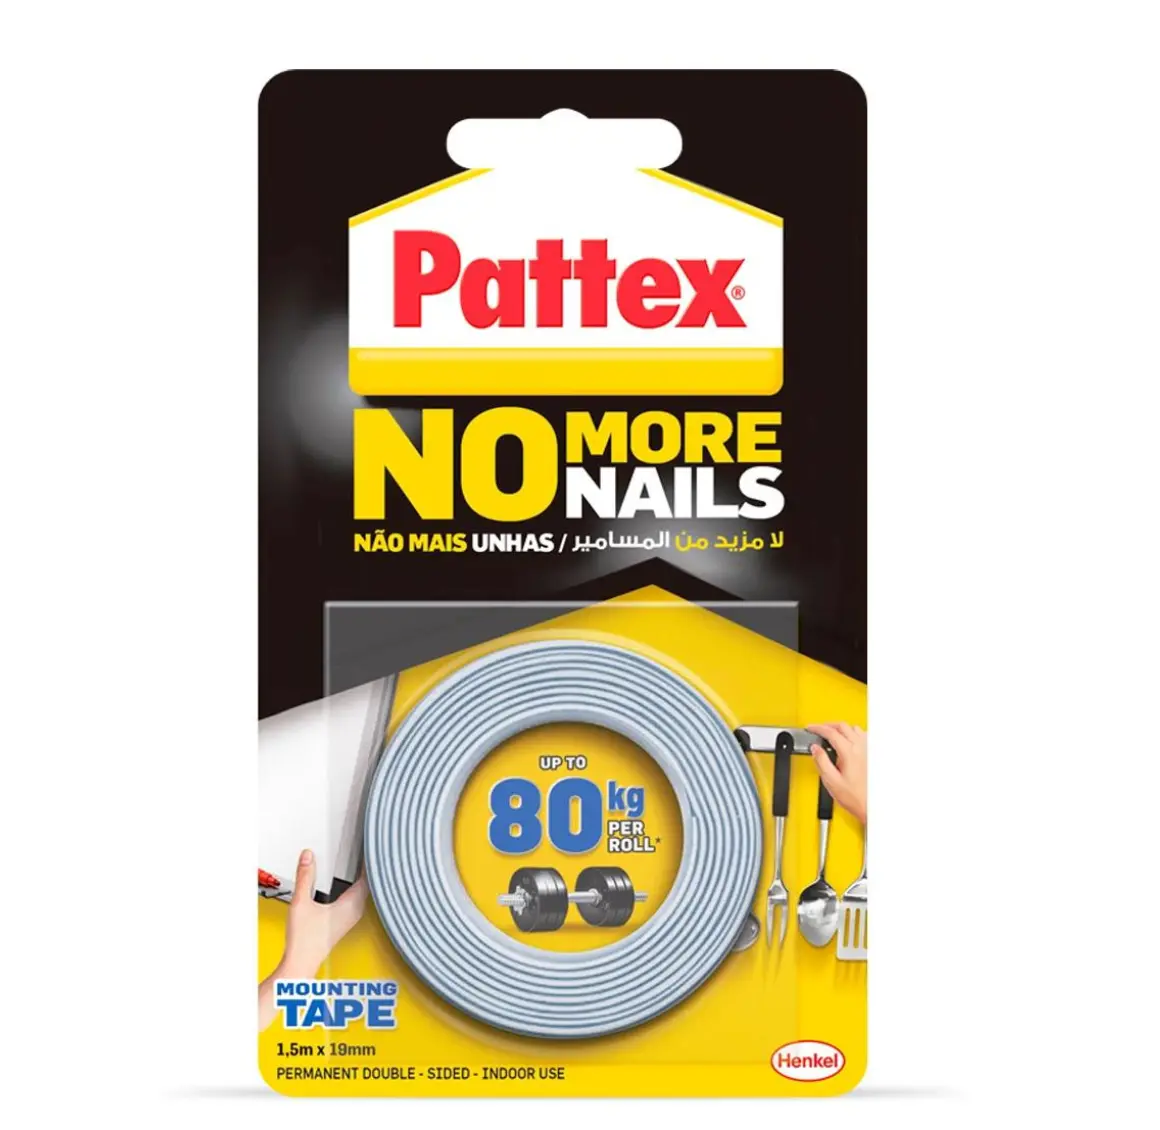 Pattex 80Kg No More Nails mounting Tape